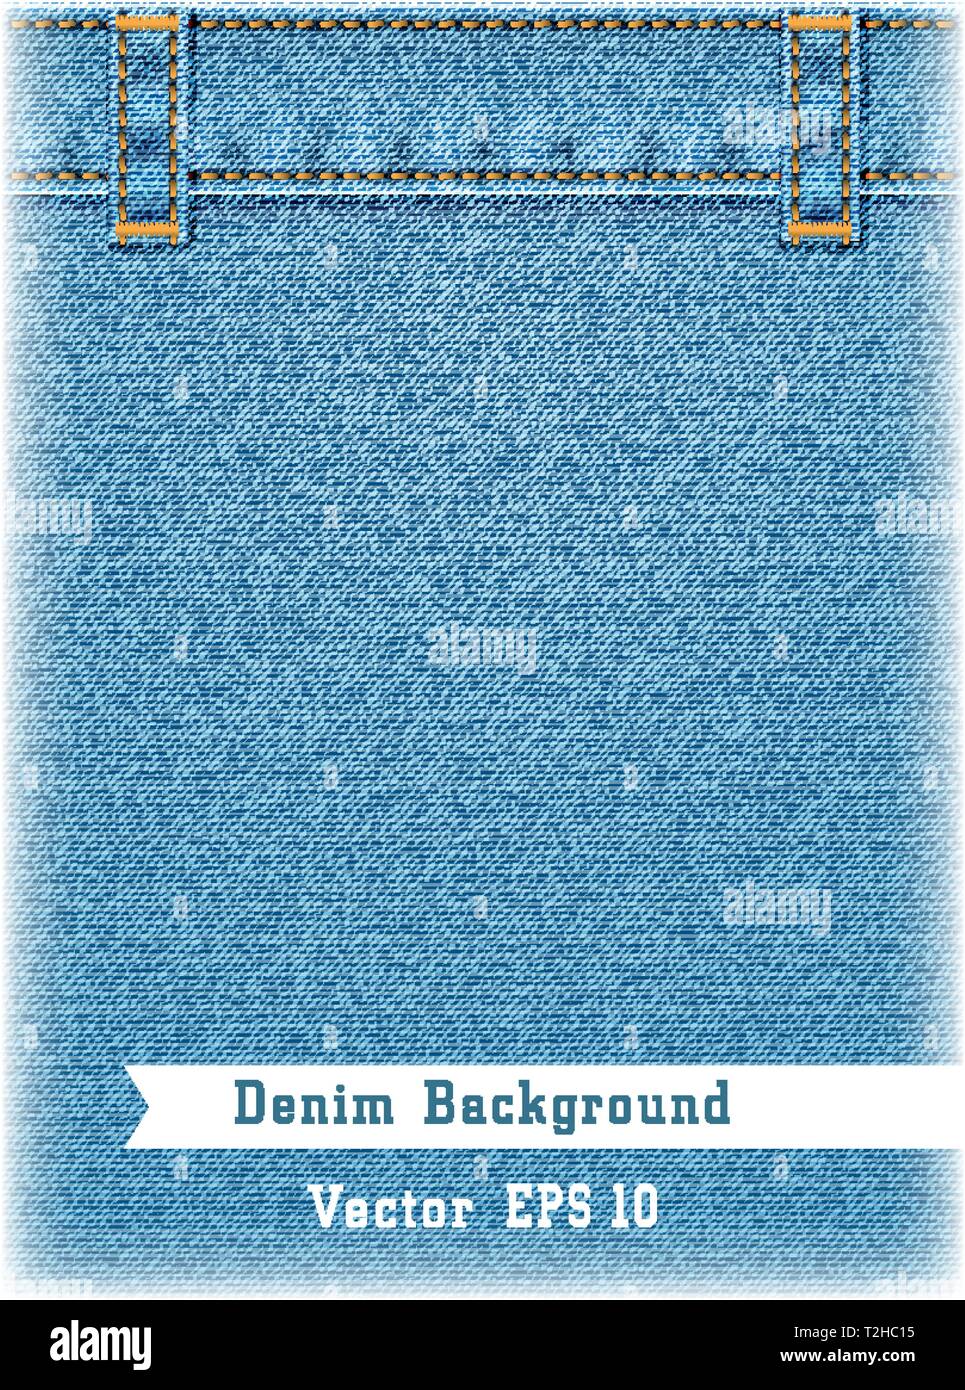 Realistic blue jeans background. Denim texture with jeans belt. Vector illustration. Stock Vector